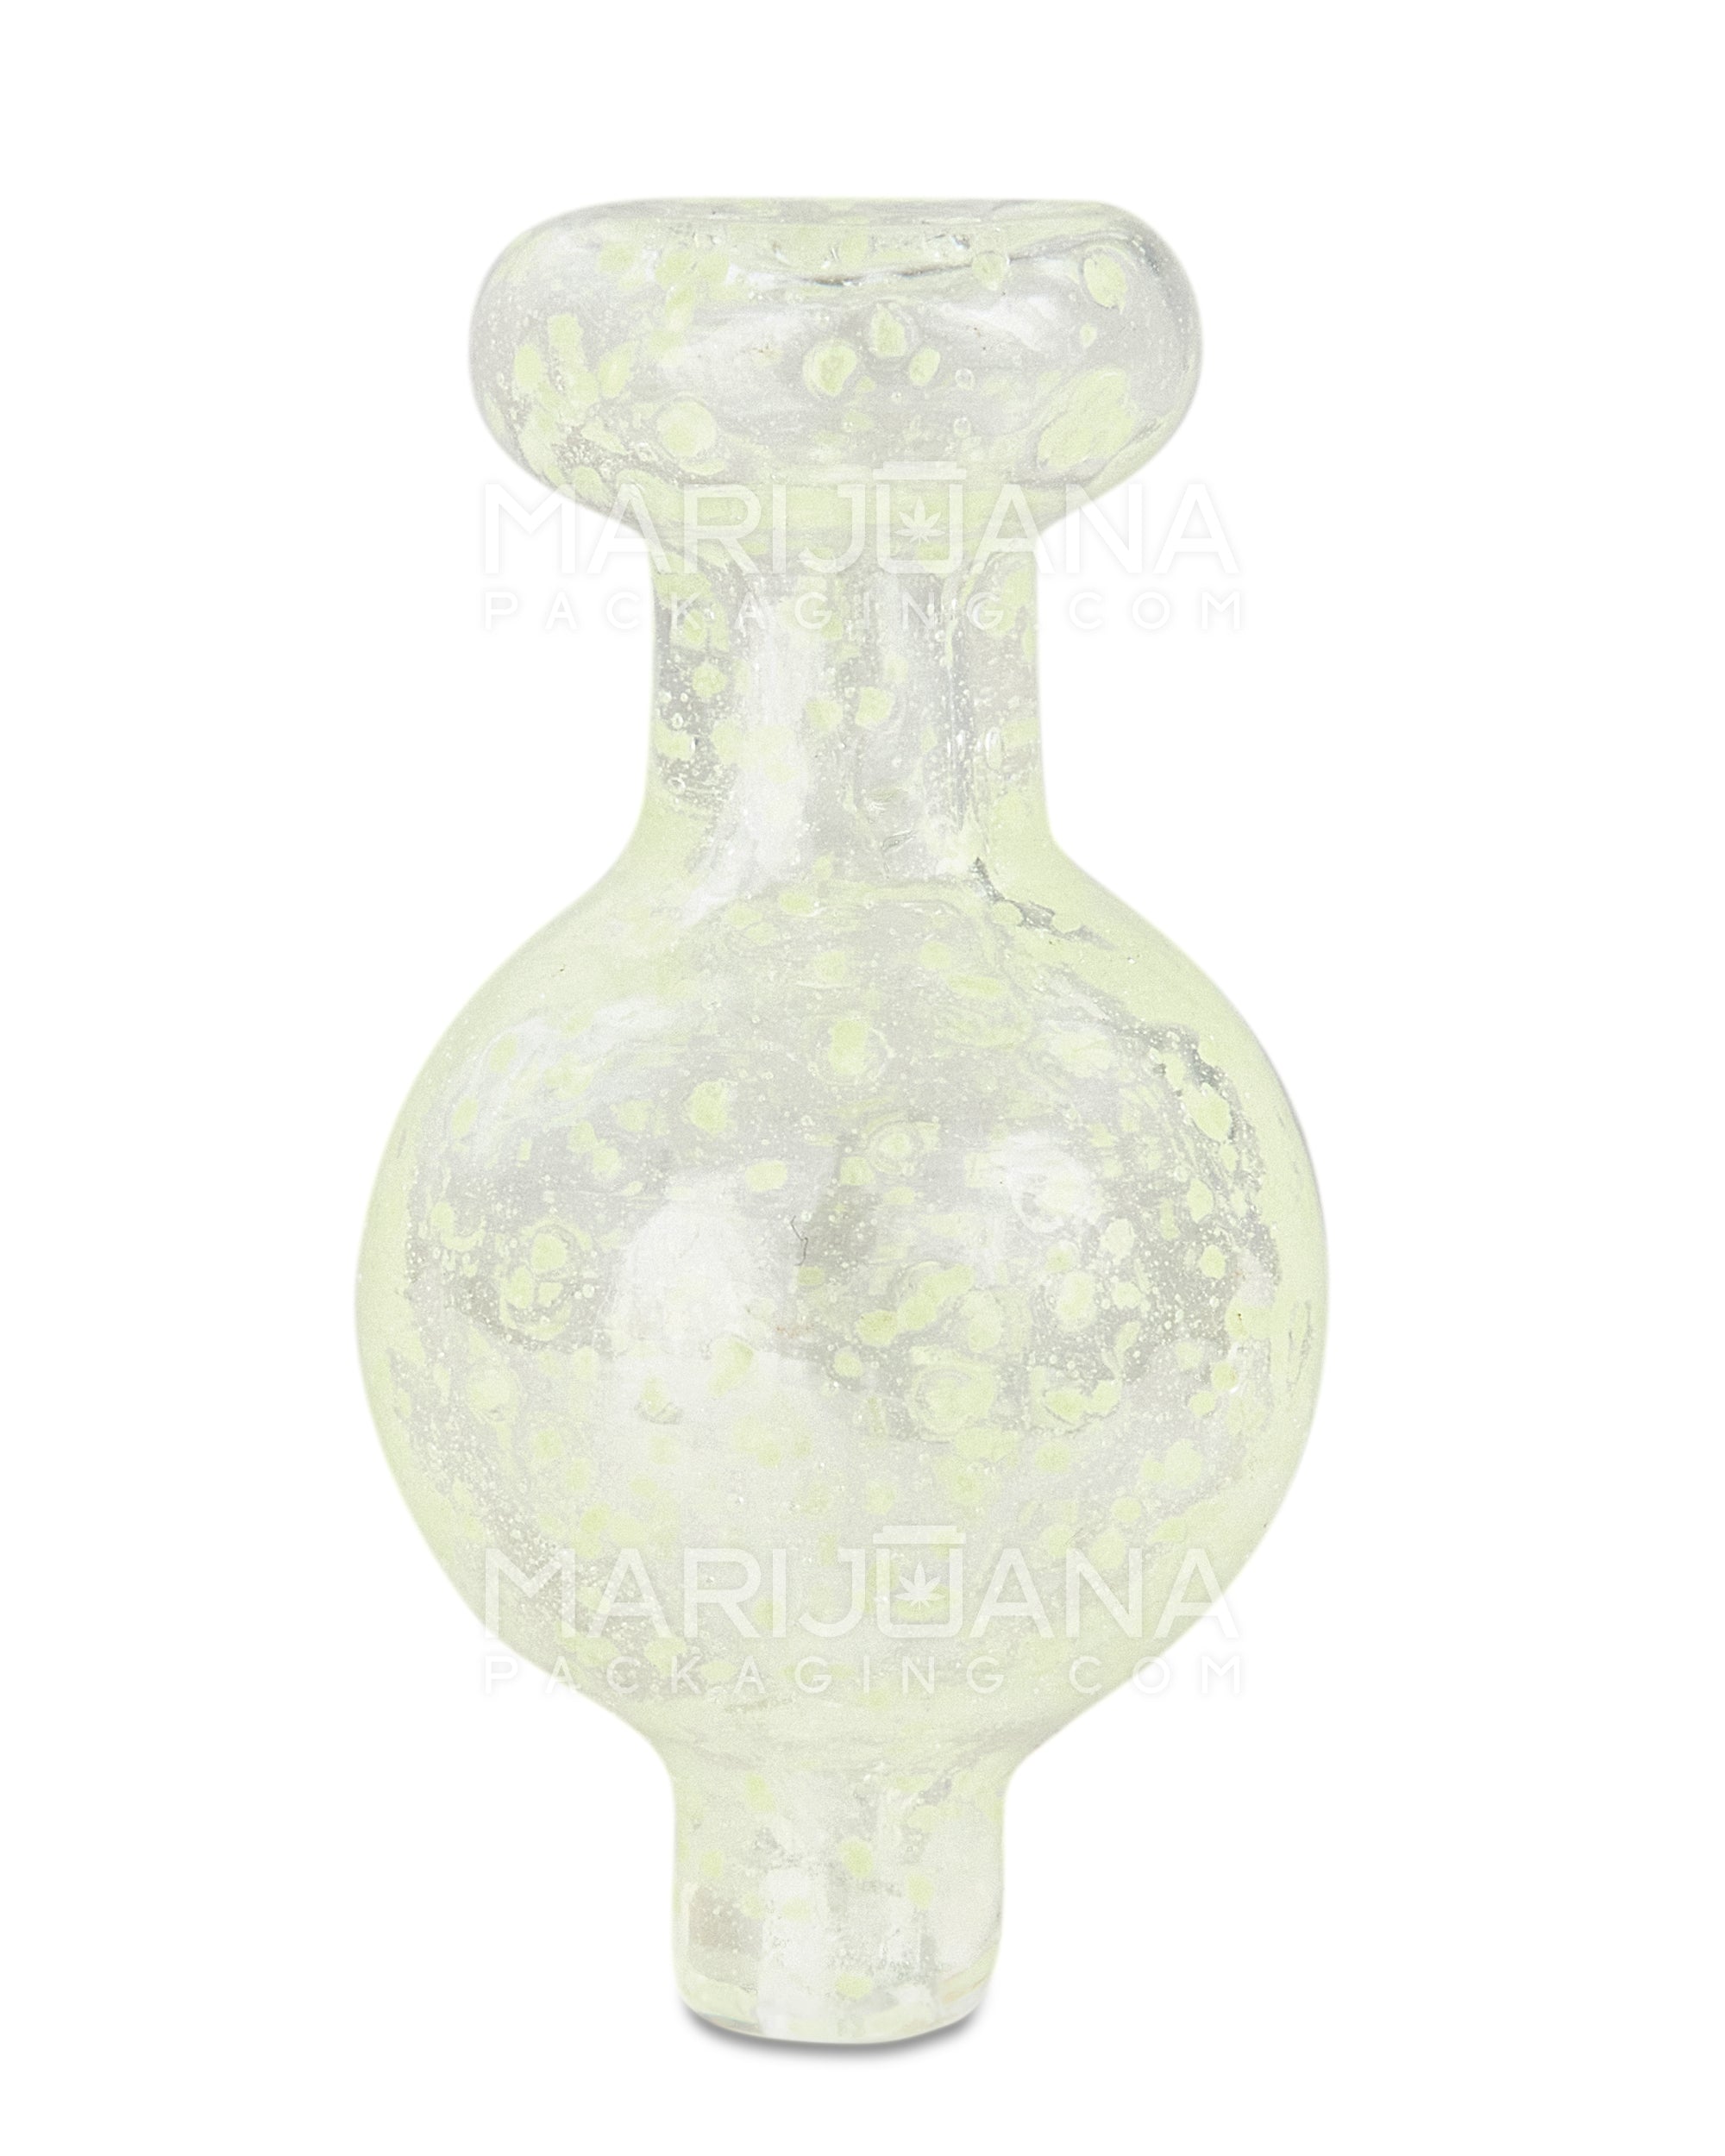 Glow-in-the-Dark | Bubble Carb Cap | 25mm - Glass - Assorted - 6